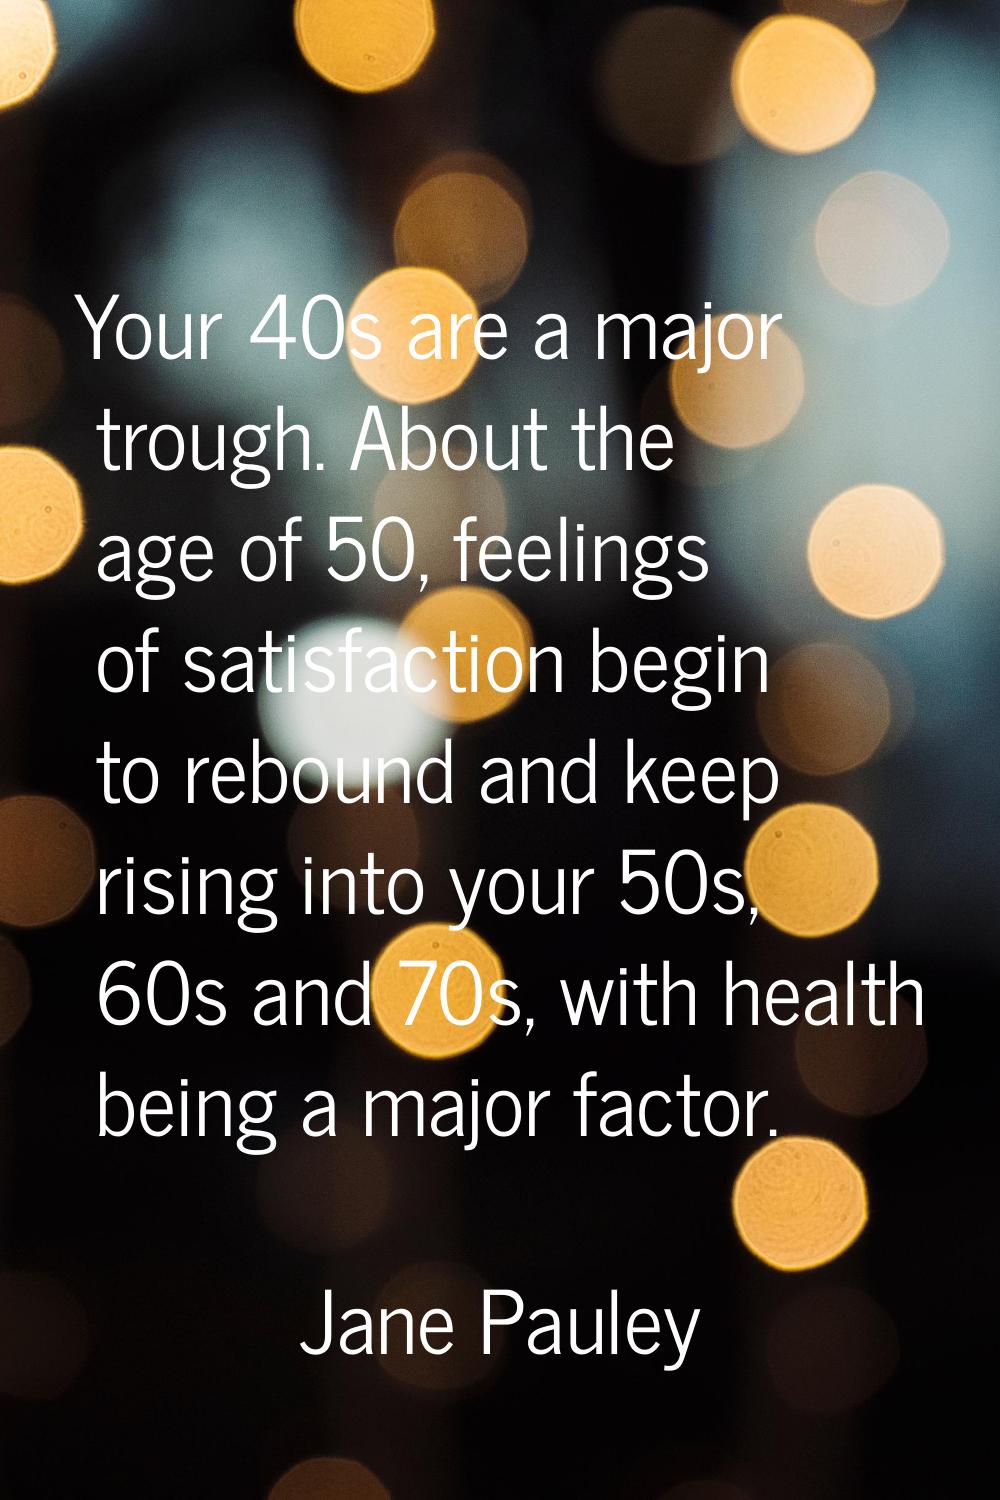 Your 40s are a major trough. About the age of 50, feelings of satisfaction begin to rebound and kee